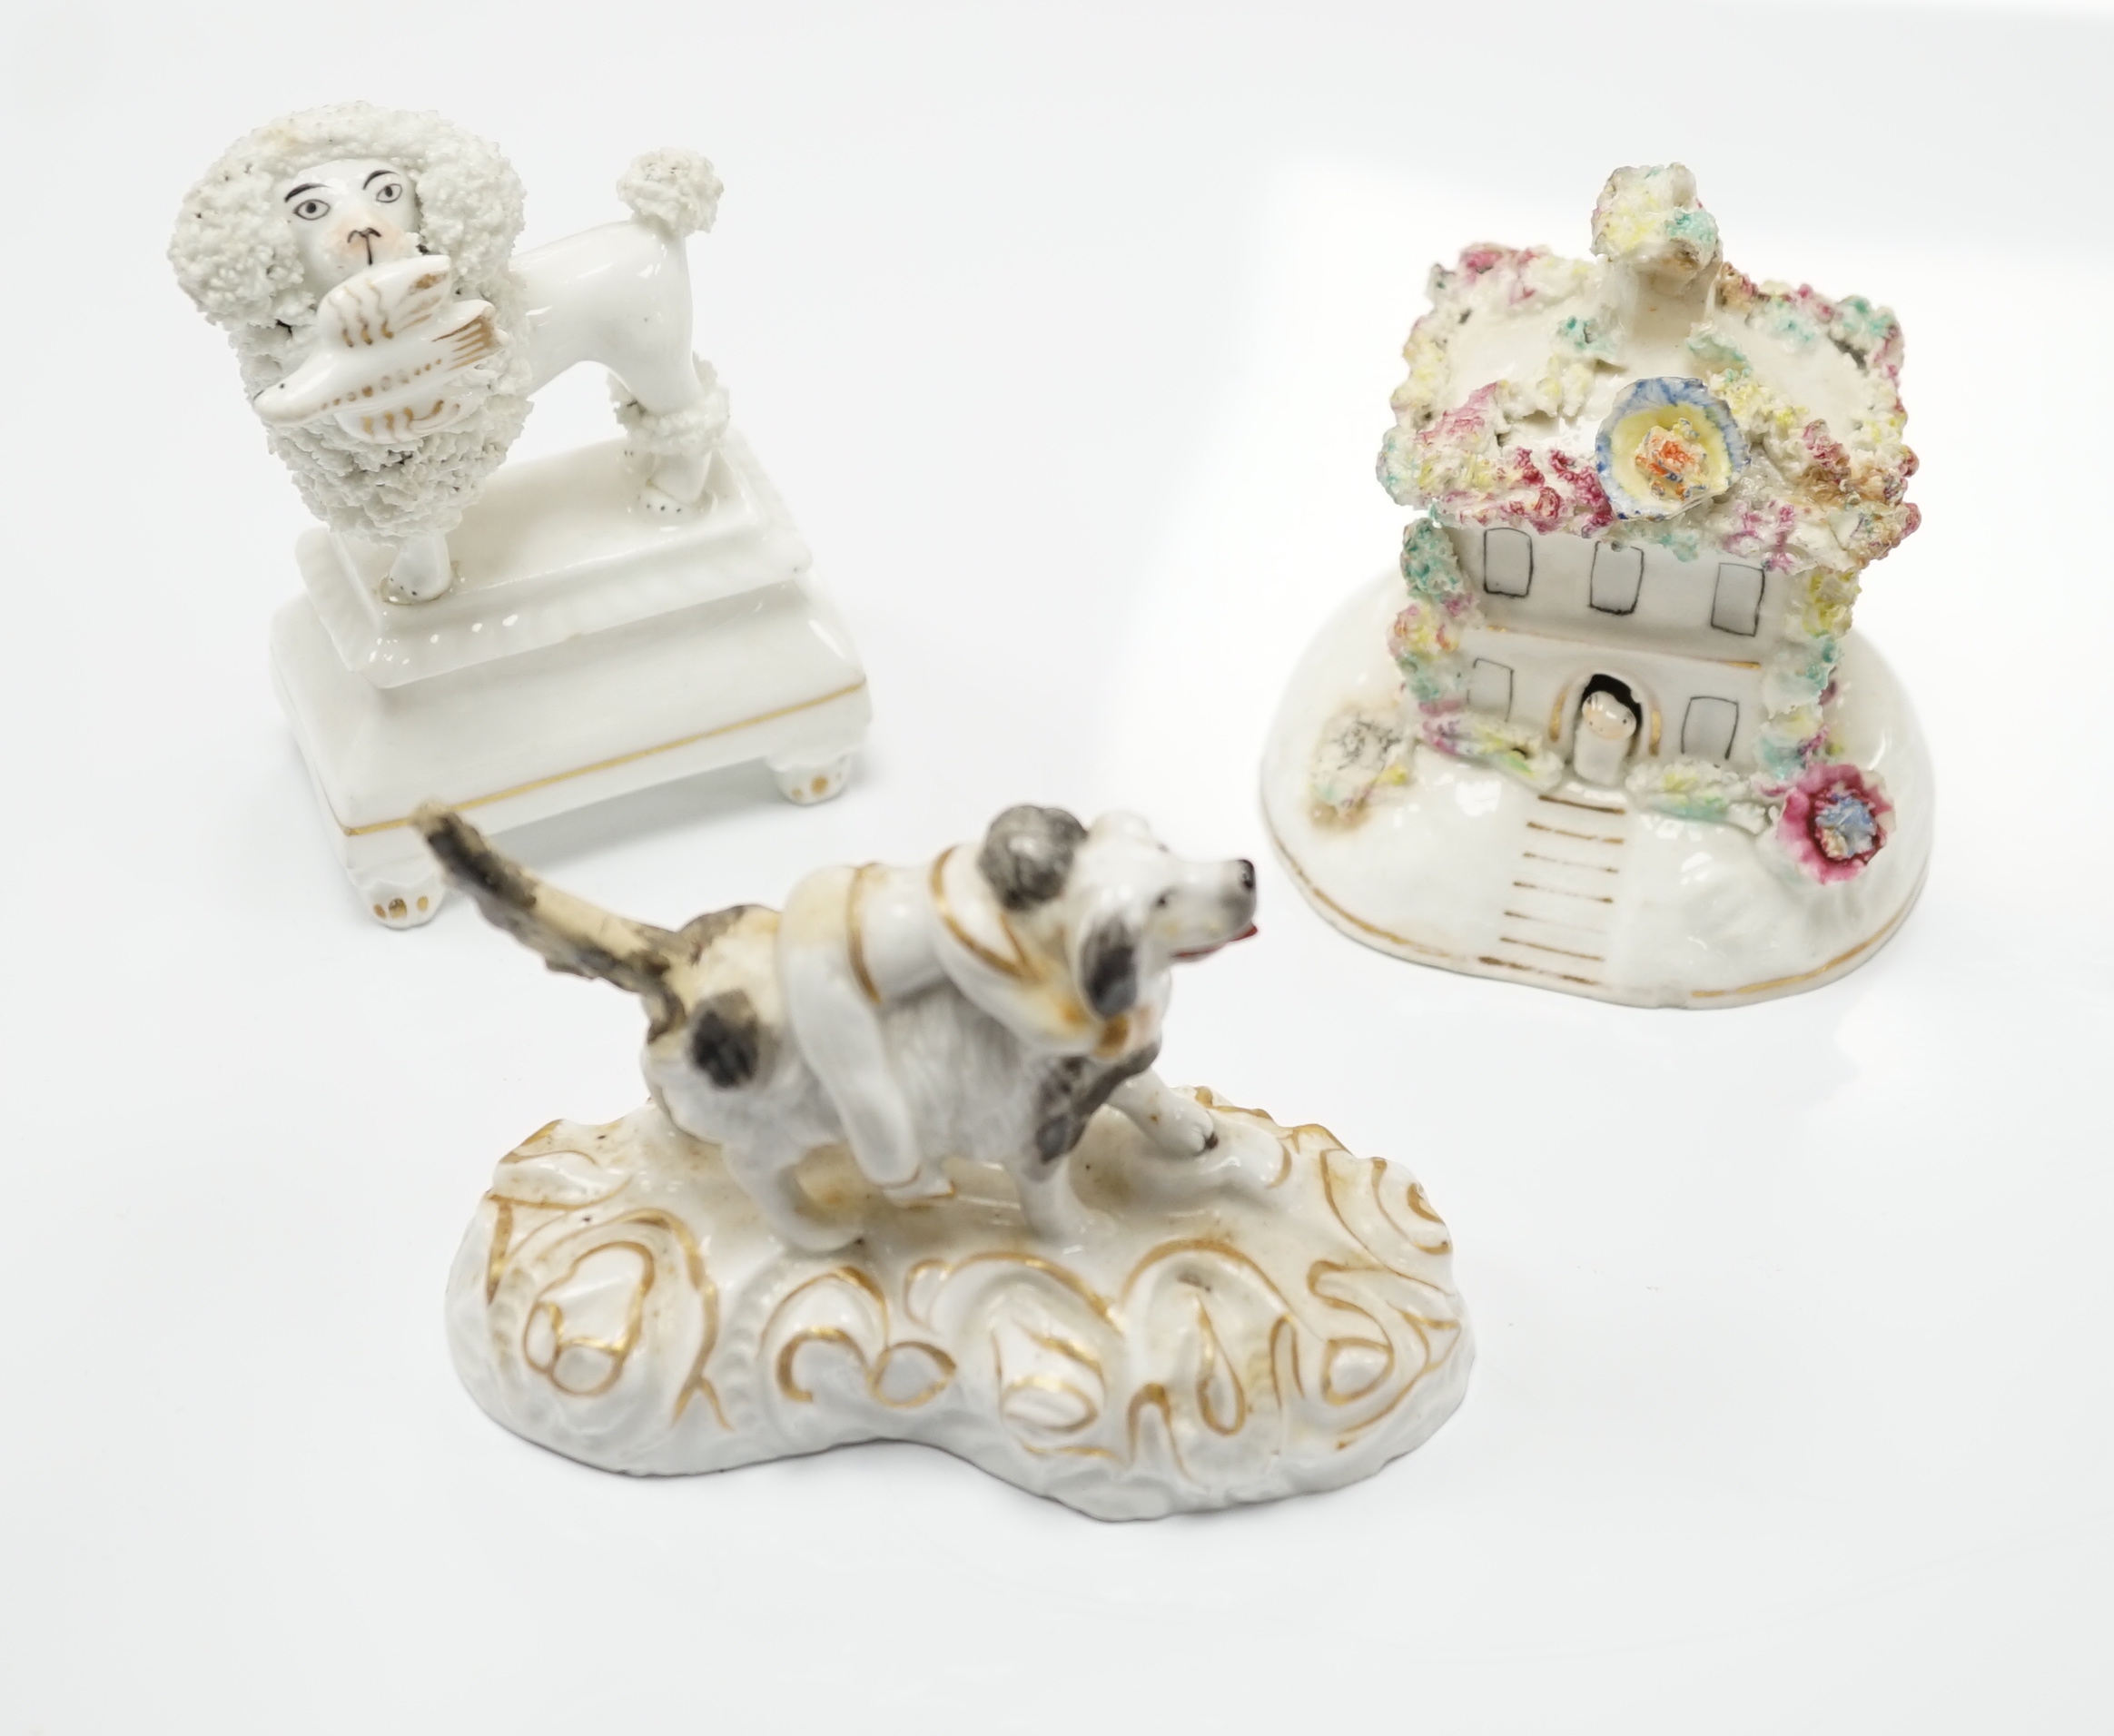 Three Staffordshire porcelain dog figures, c.1830-50, comprising a boy clinging to the back of a spaniel, a model of a poodle with a bird in its mouth and a model of a cottage with a small dog in the doorway, tallest 9cm